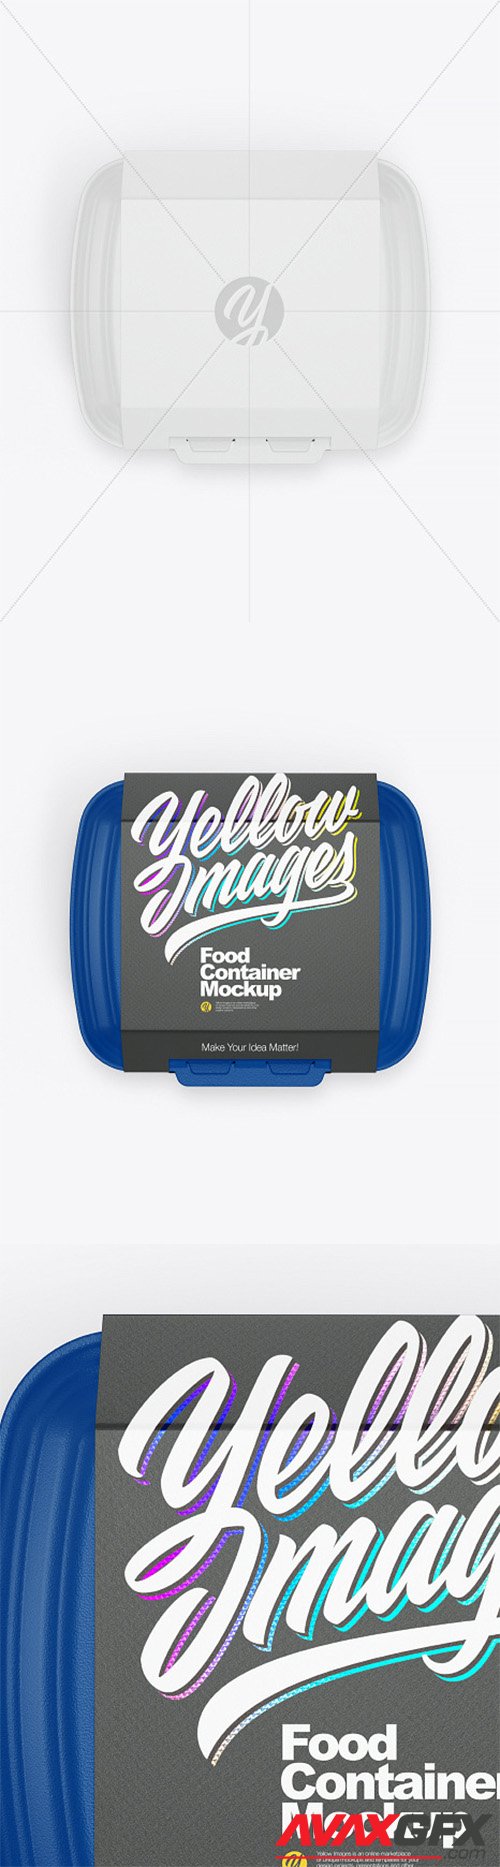 Food Container Mockup 65223